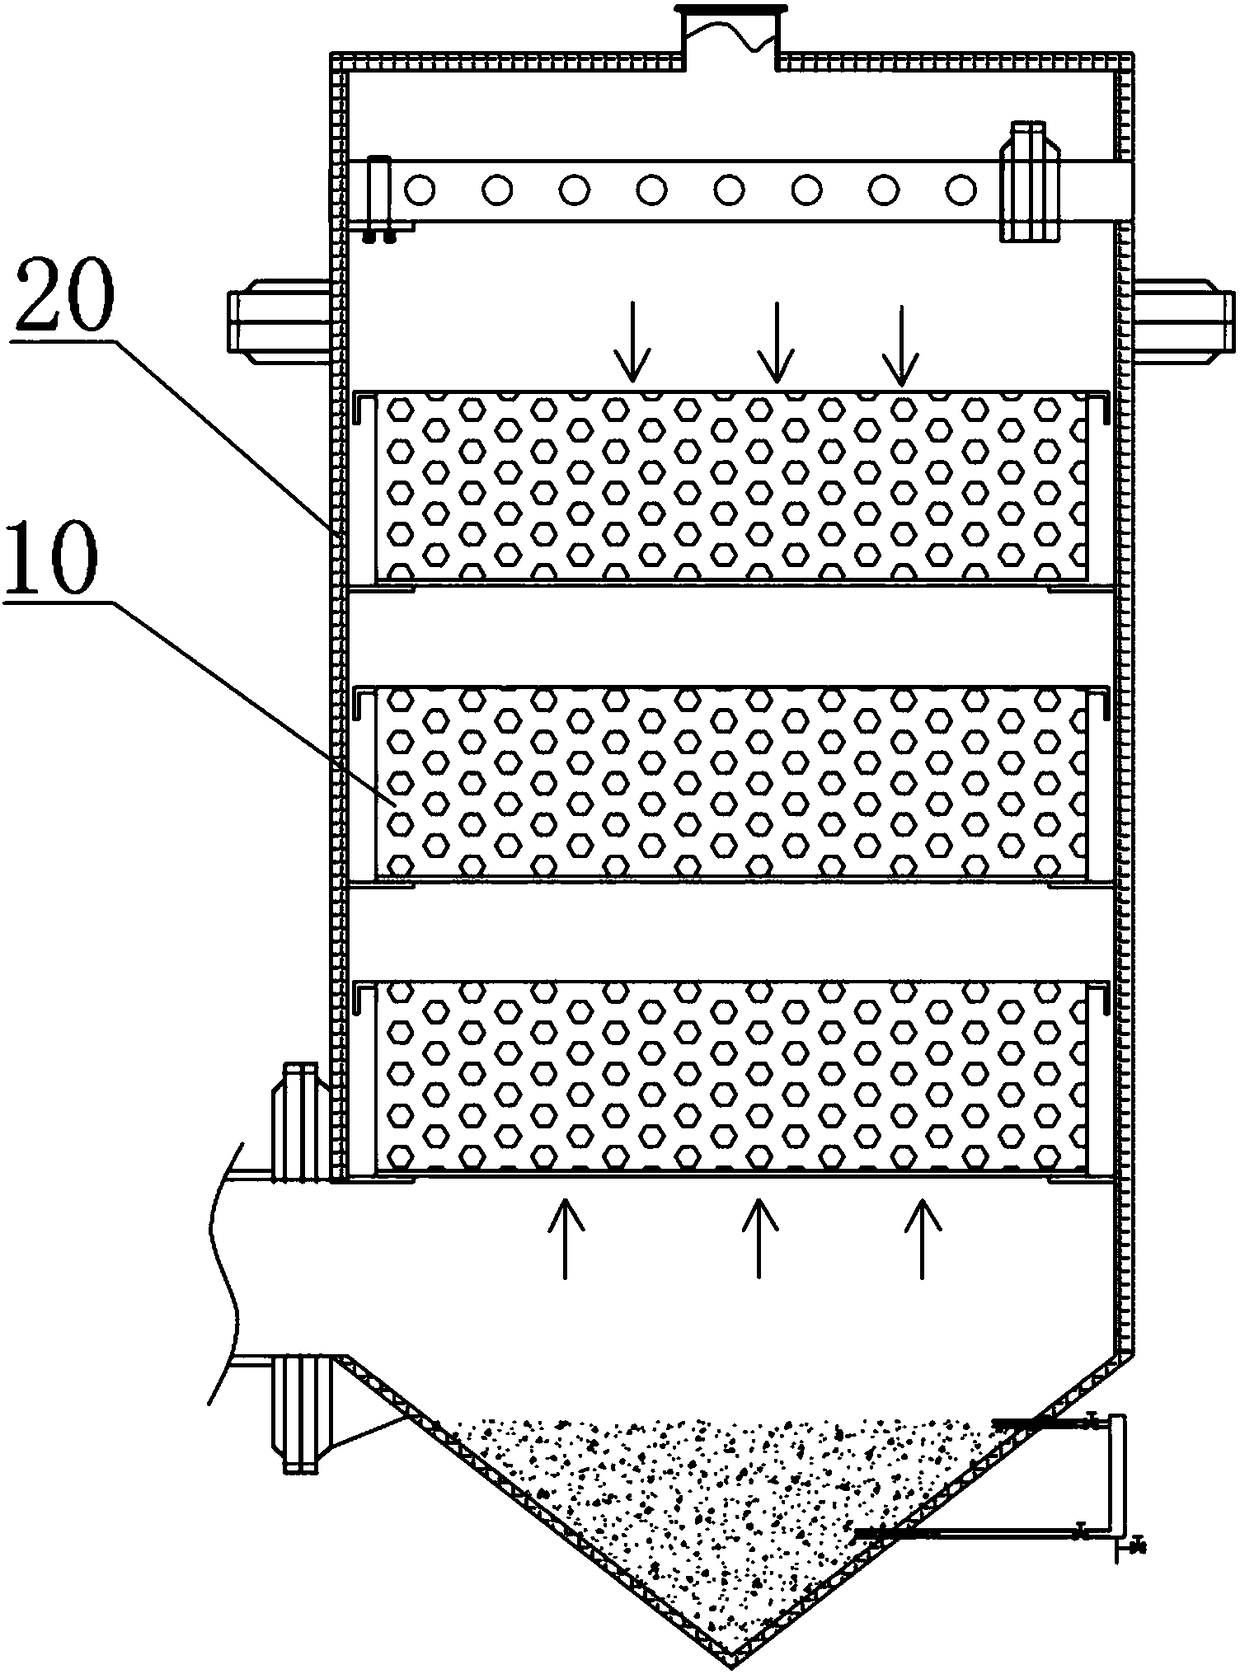 High-temperature flue gas quenching device